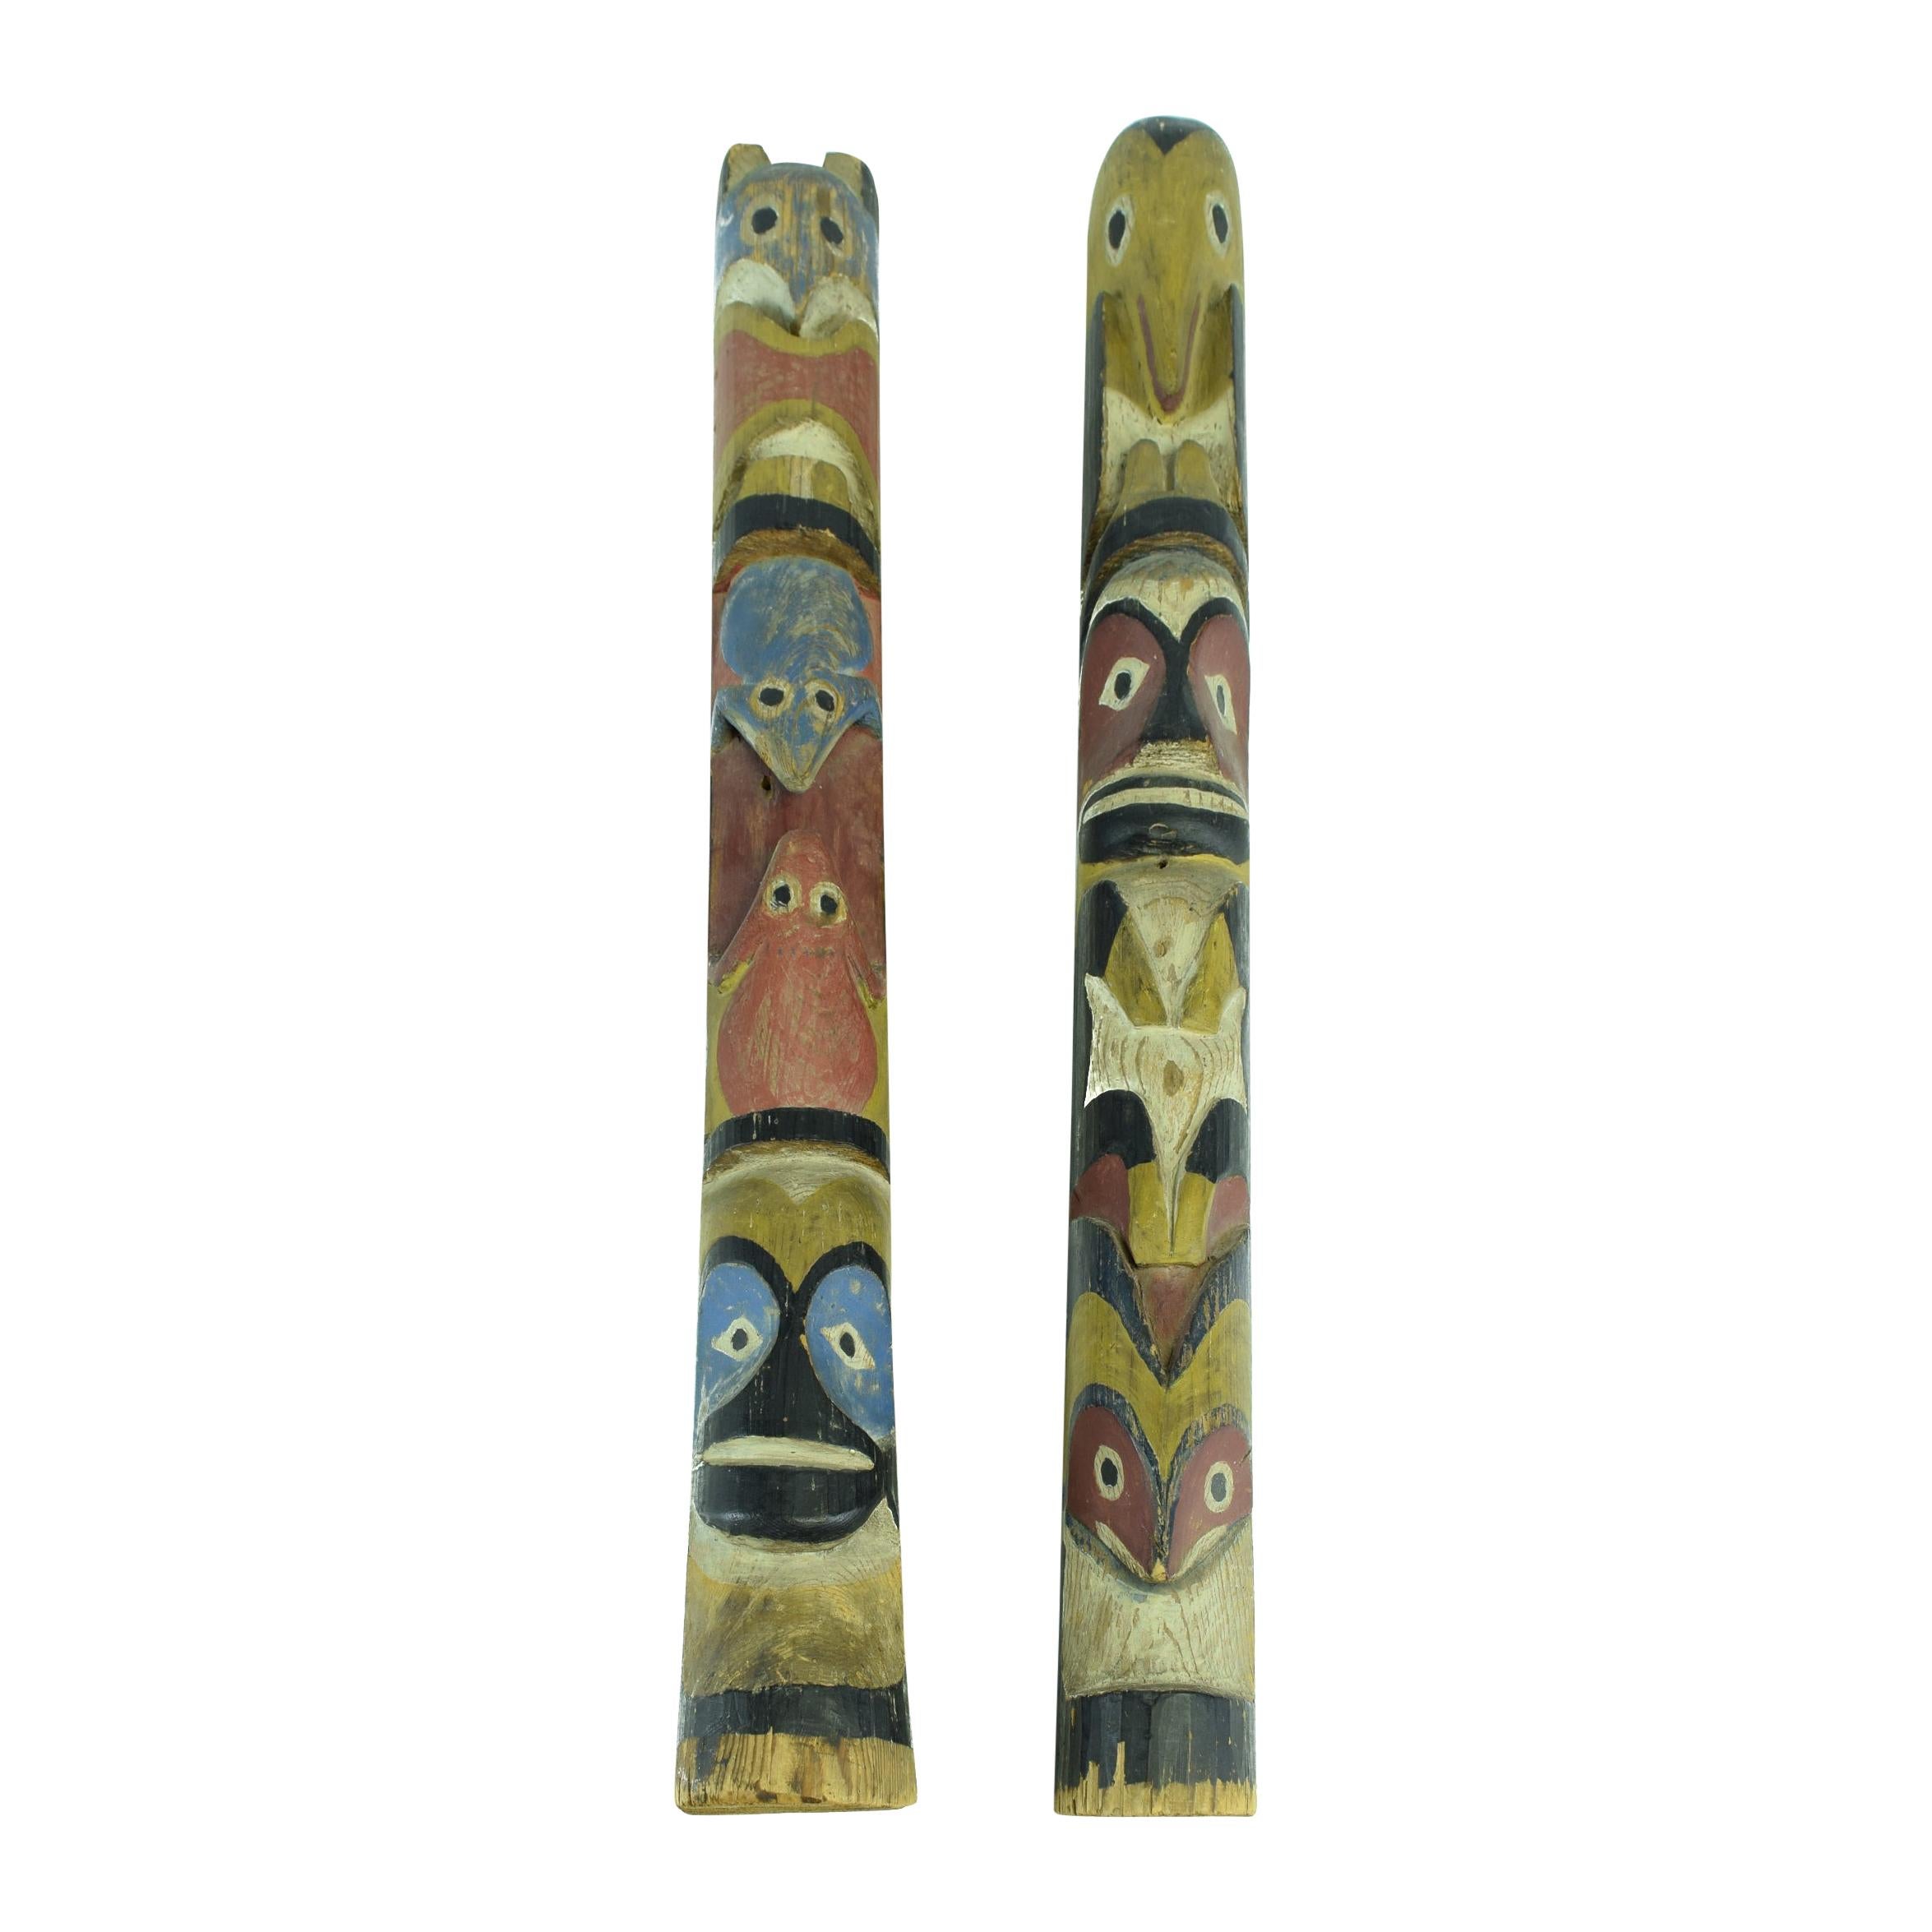 Pair of Nuu-chah-nulth Model Totems